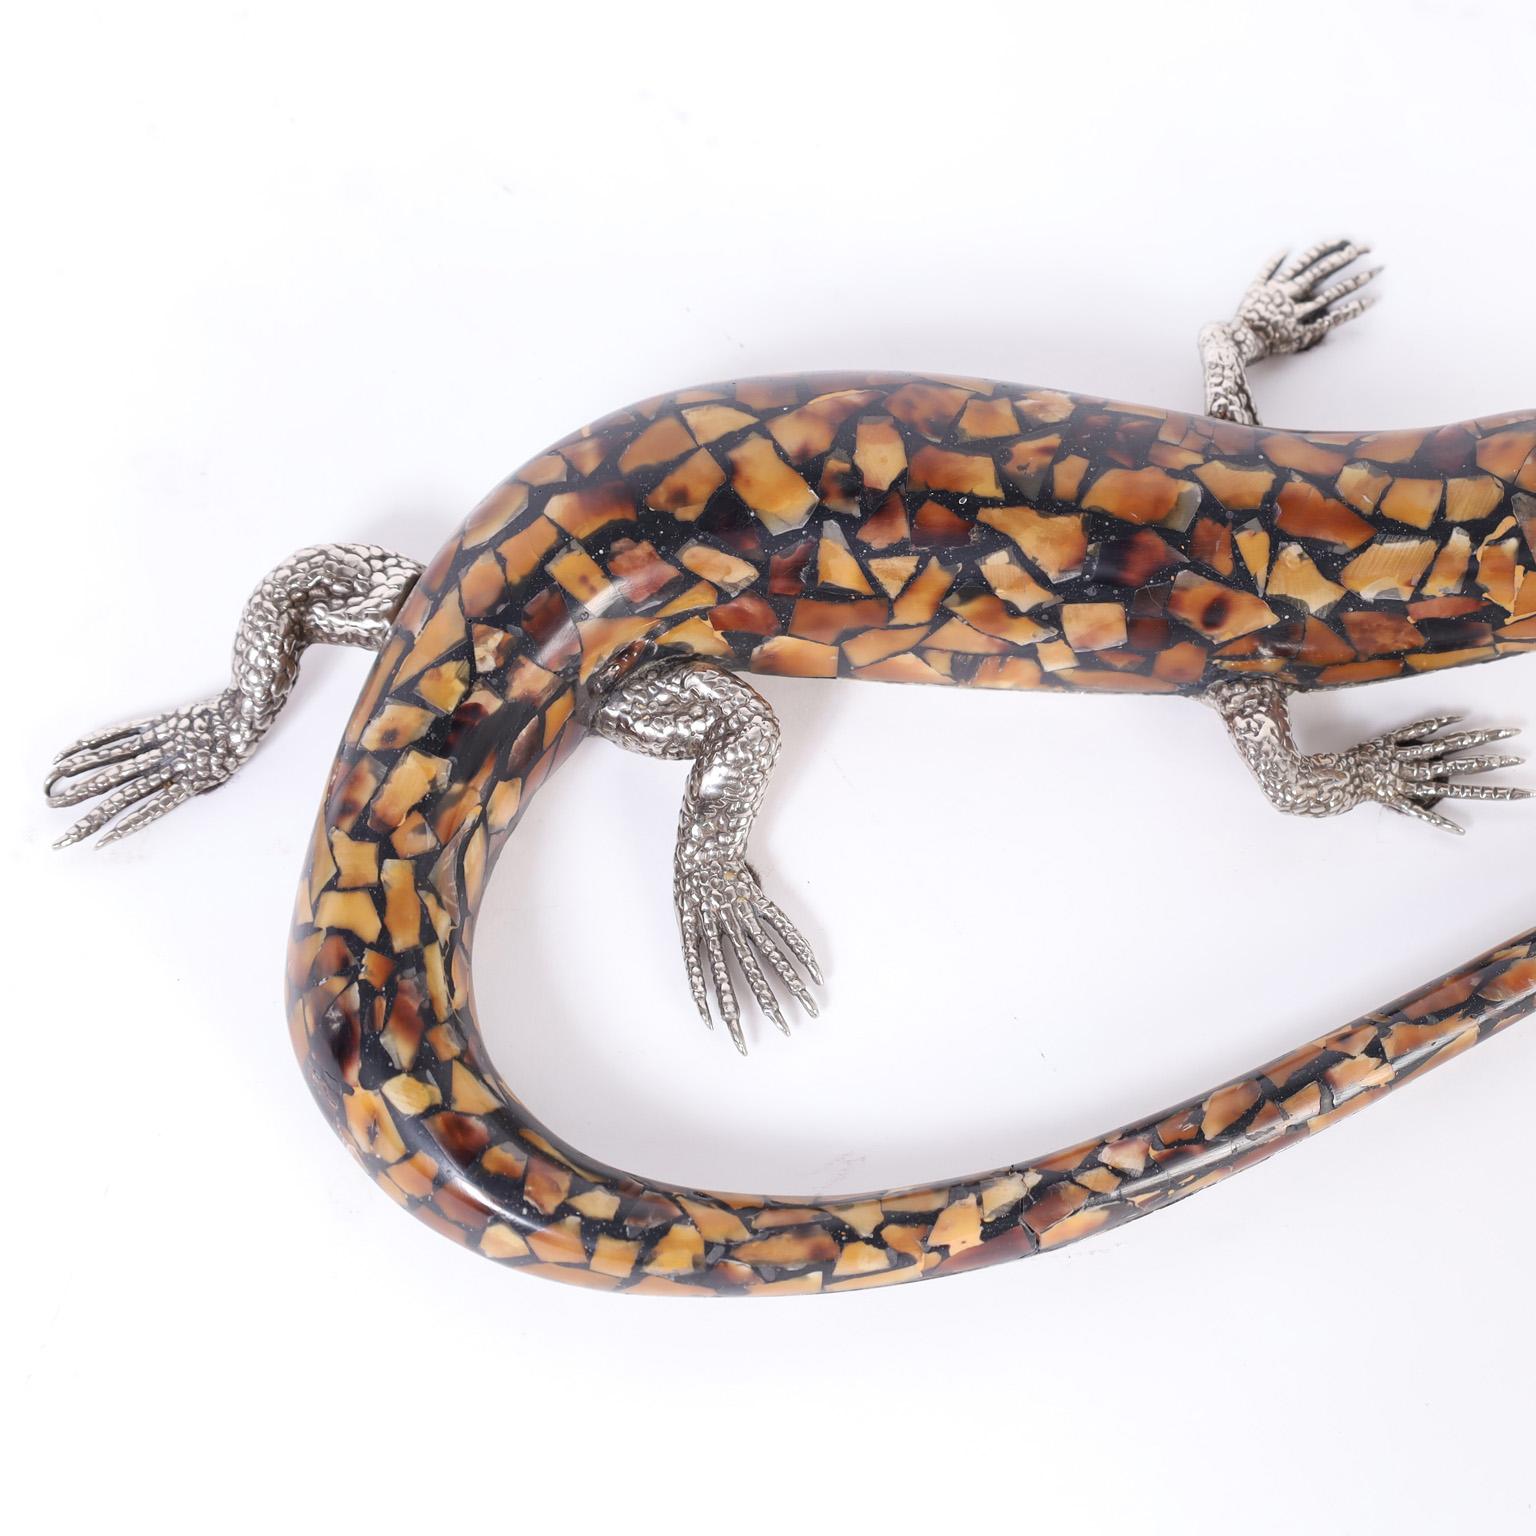 20th Century Life Size Lizard Sculpture by Maitland-Smith